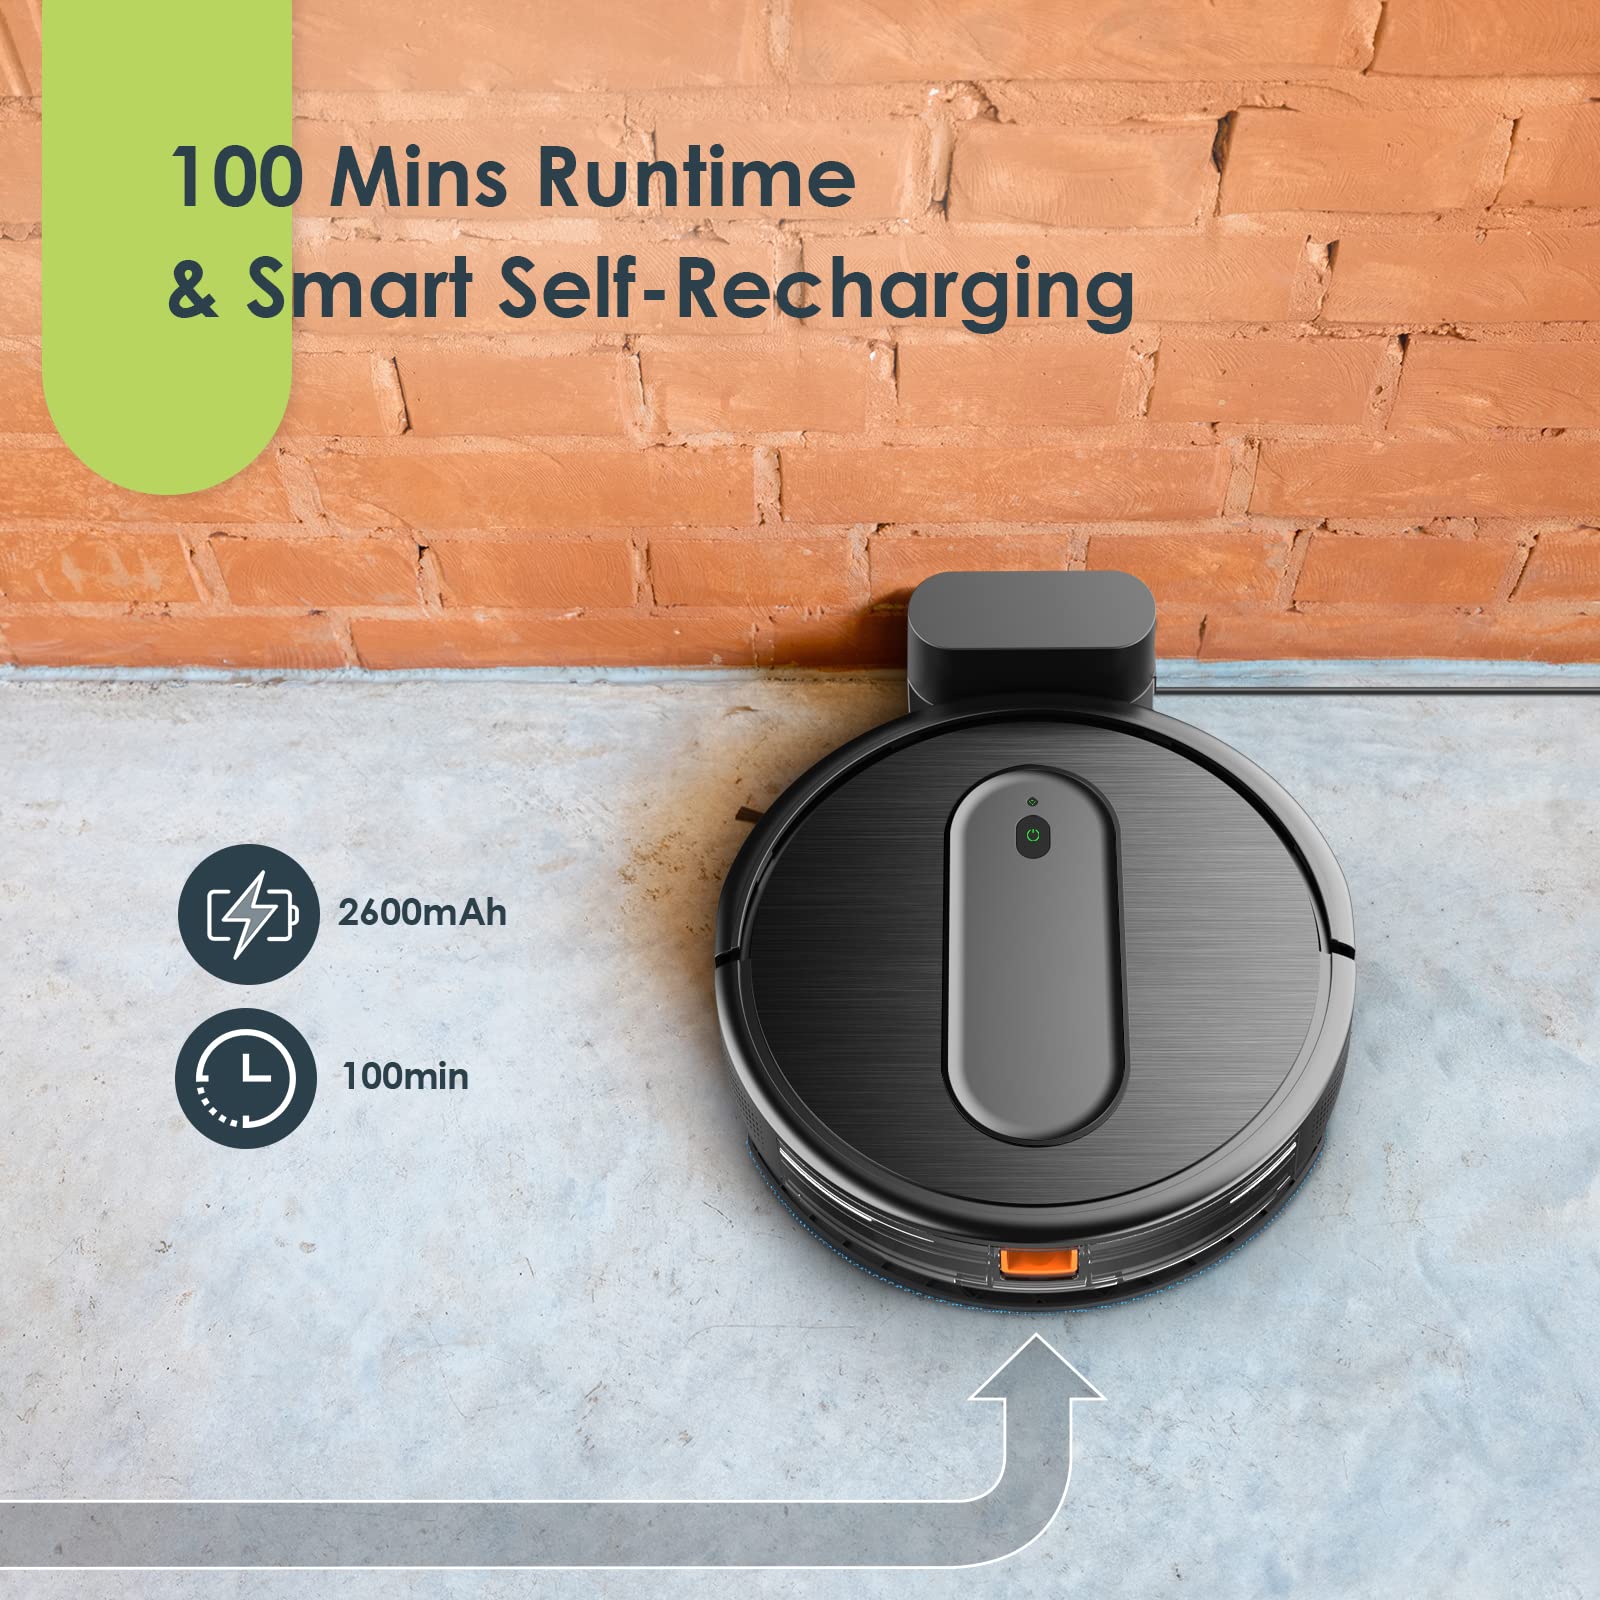 Robot Vacuum and Mop Combo, 3 in 1 Mopping Robotic Vacuum with Schedule, App/2.4Ghz Wi-Fi/Alexa, 1600Pa Max Suction, Self-Charging Robot Vacuum Cleaner, Slim, Ideal for Hard Floor, Pet Hair, Carpet